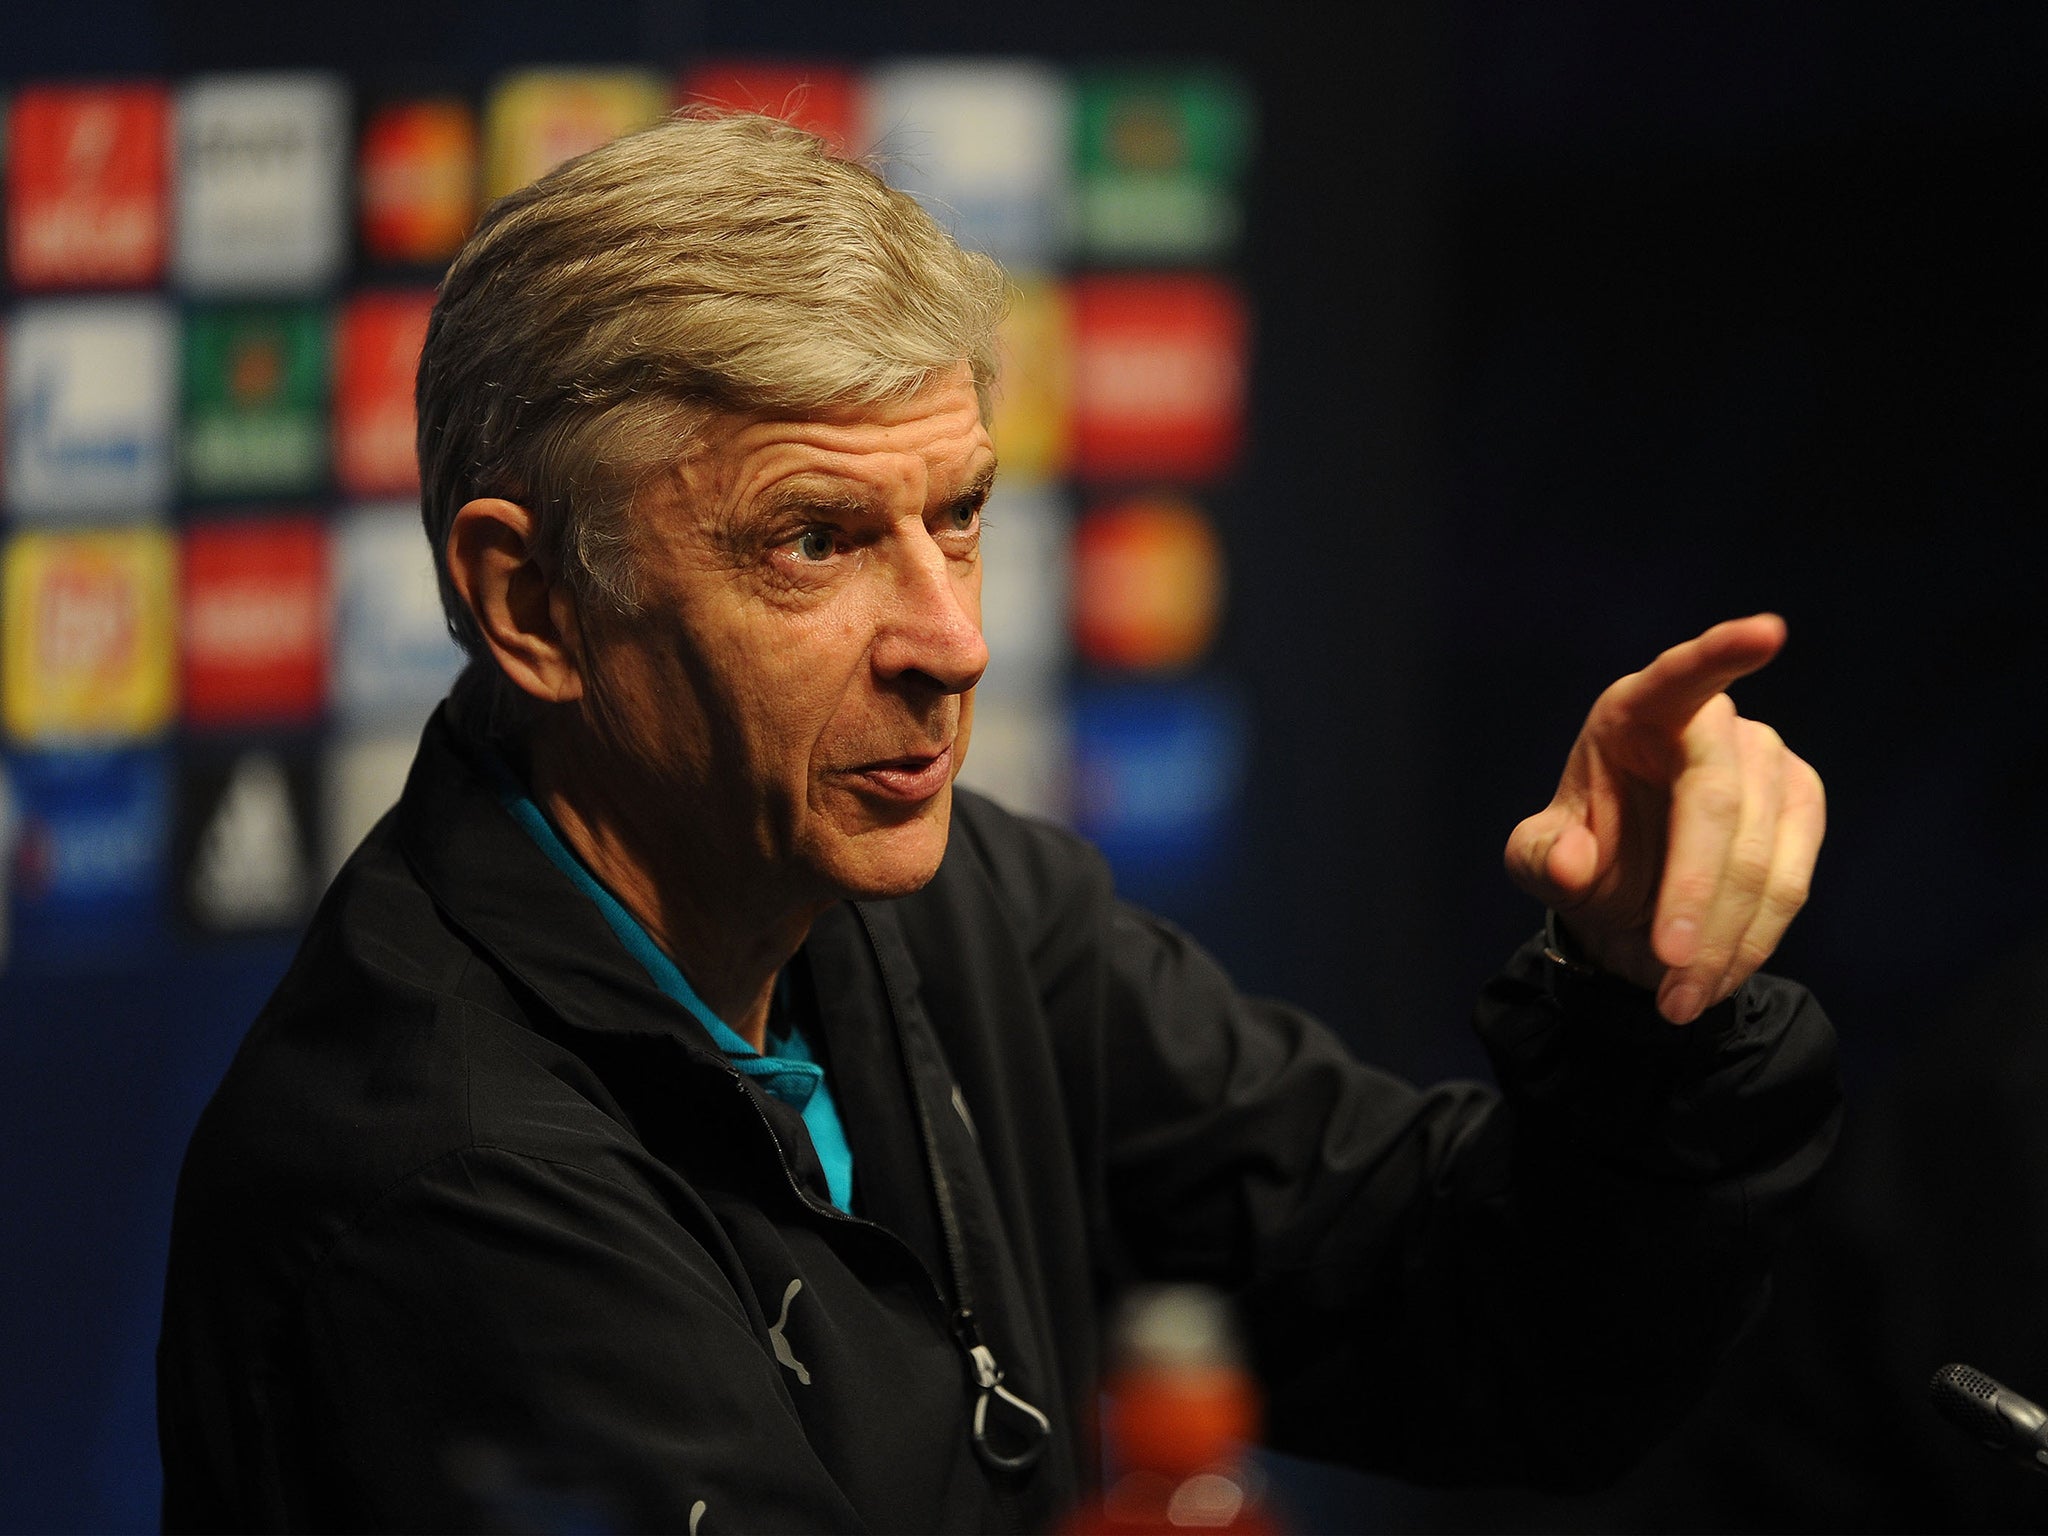 Arsenal manager Arsene Wenger speaks to the press on Tuesday night